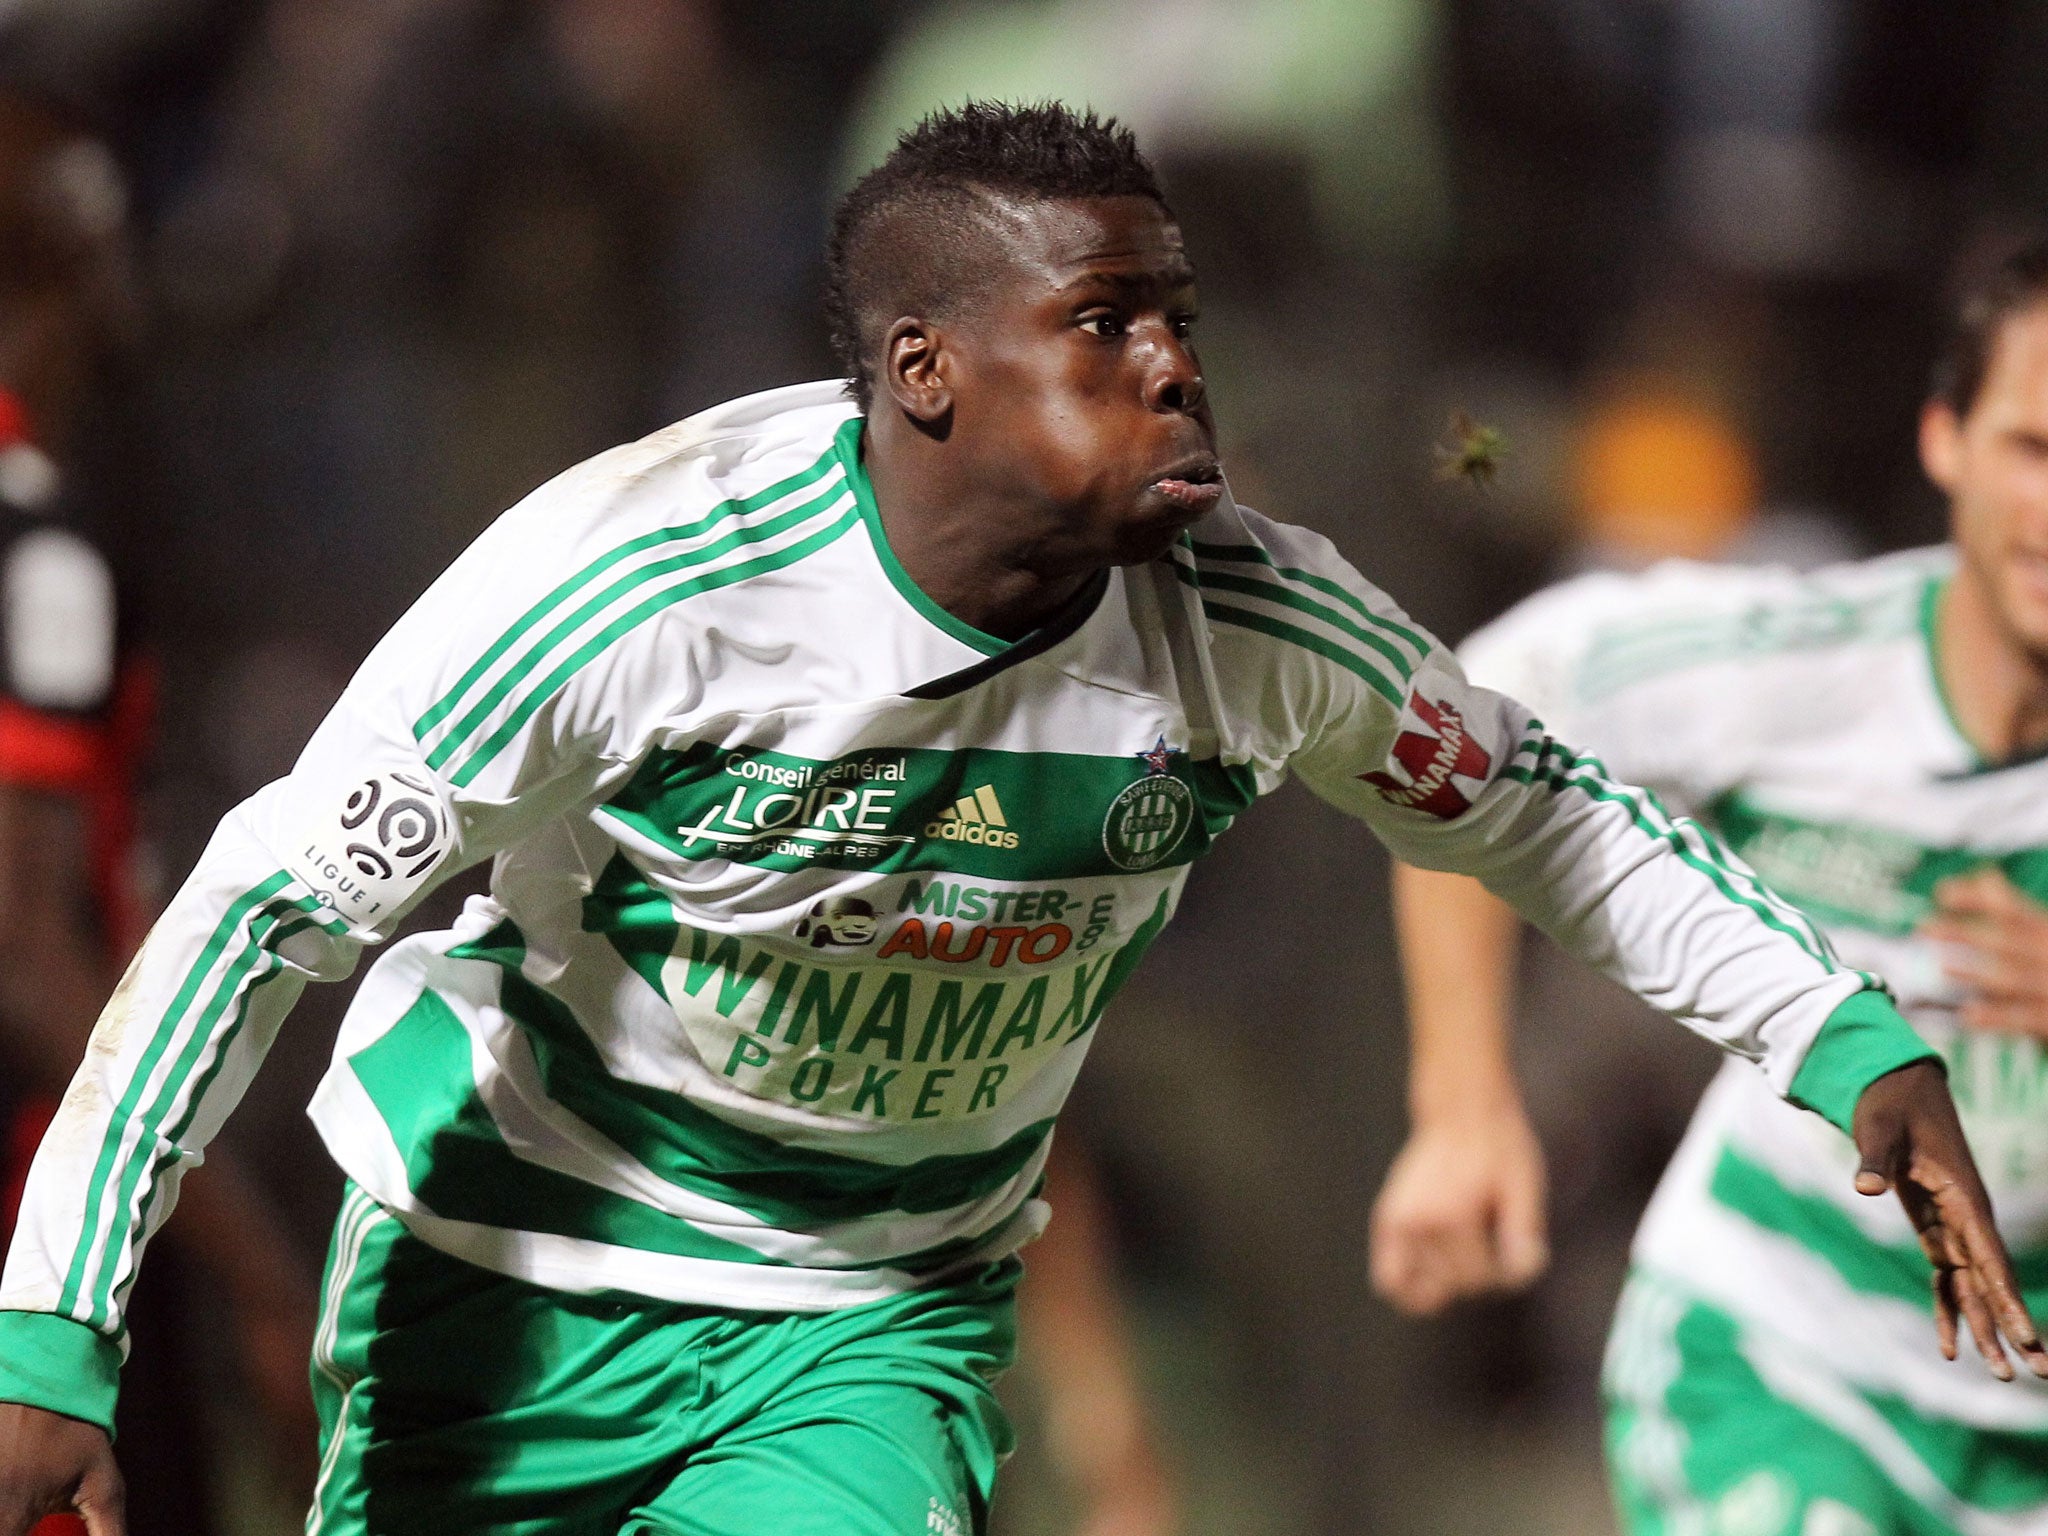 Kurt Zouma: The 6ft 2in Saint-Etienne defender has been watched by United